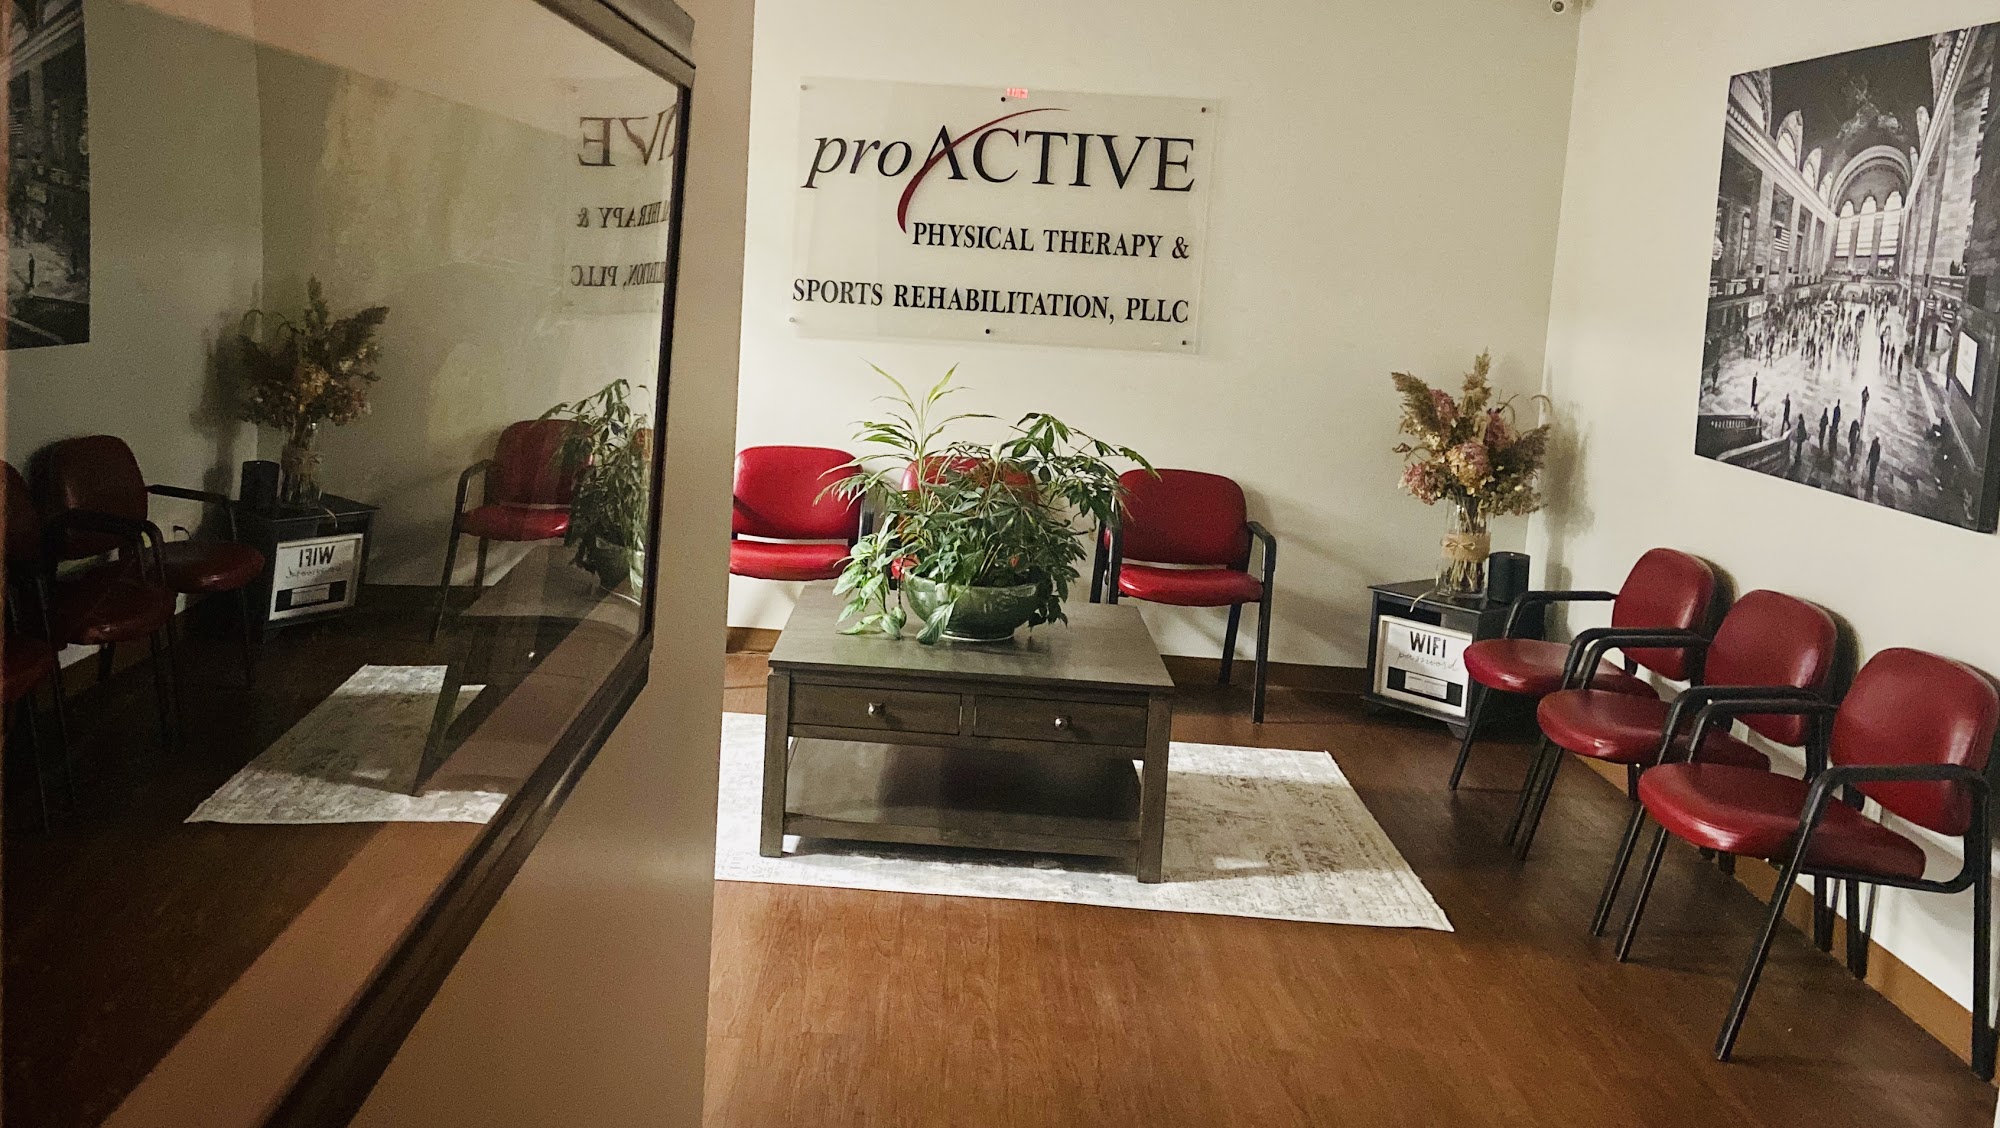 Proactive Physical Therapy & Sports Rehabilitation, PLLC